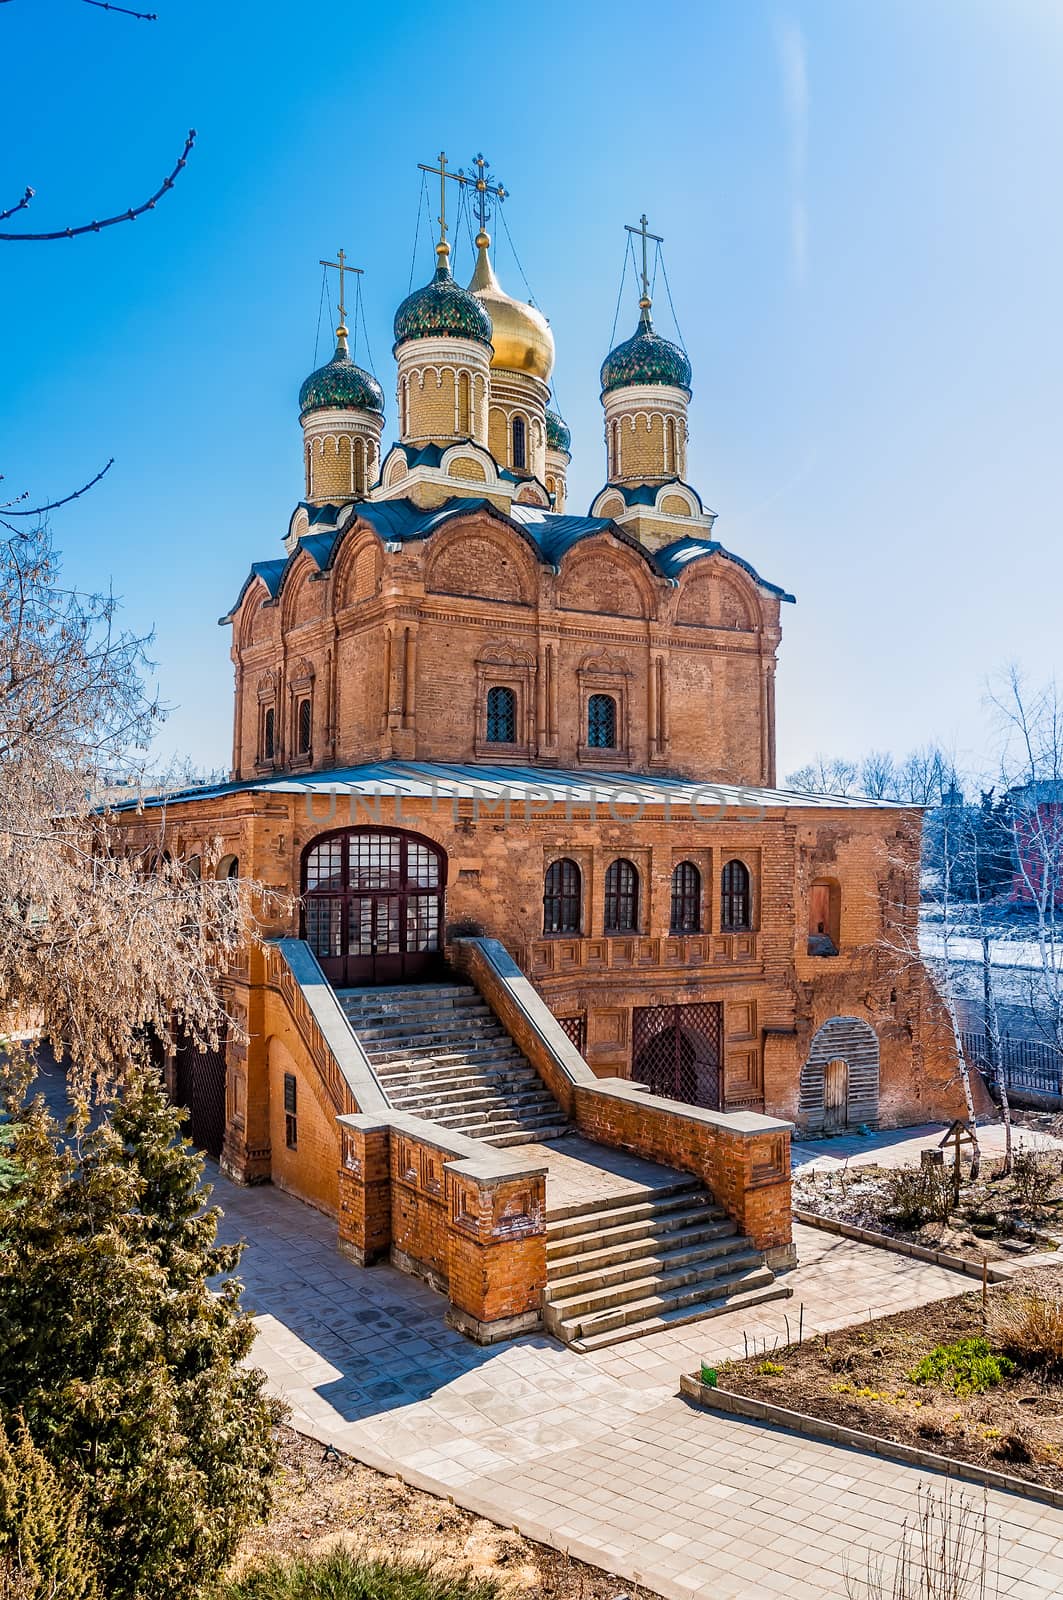 The church of the Znamensky monastery in Moscow, capitol of Russia